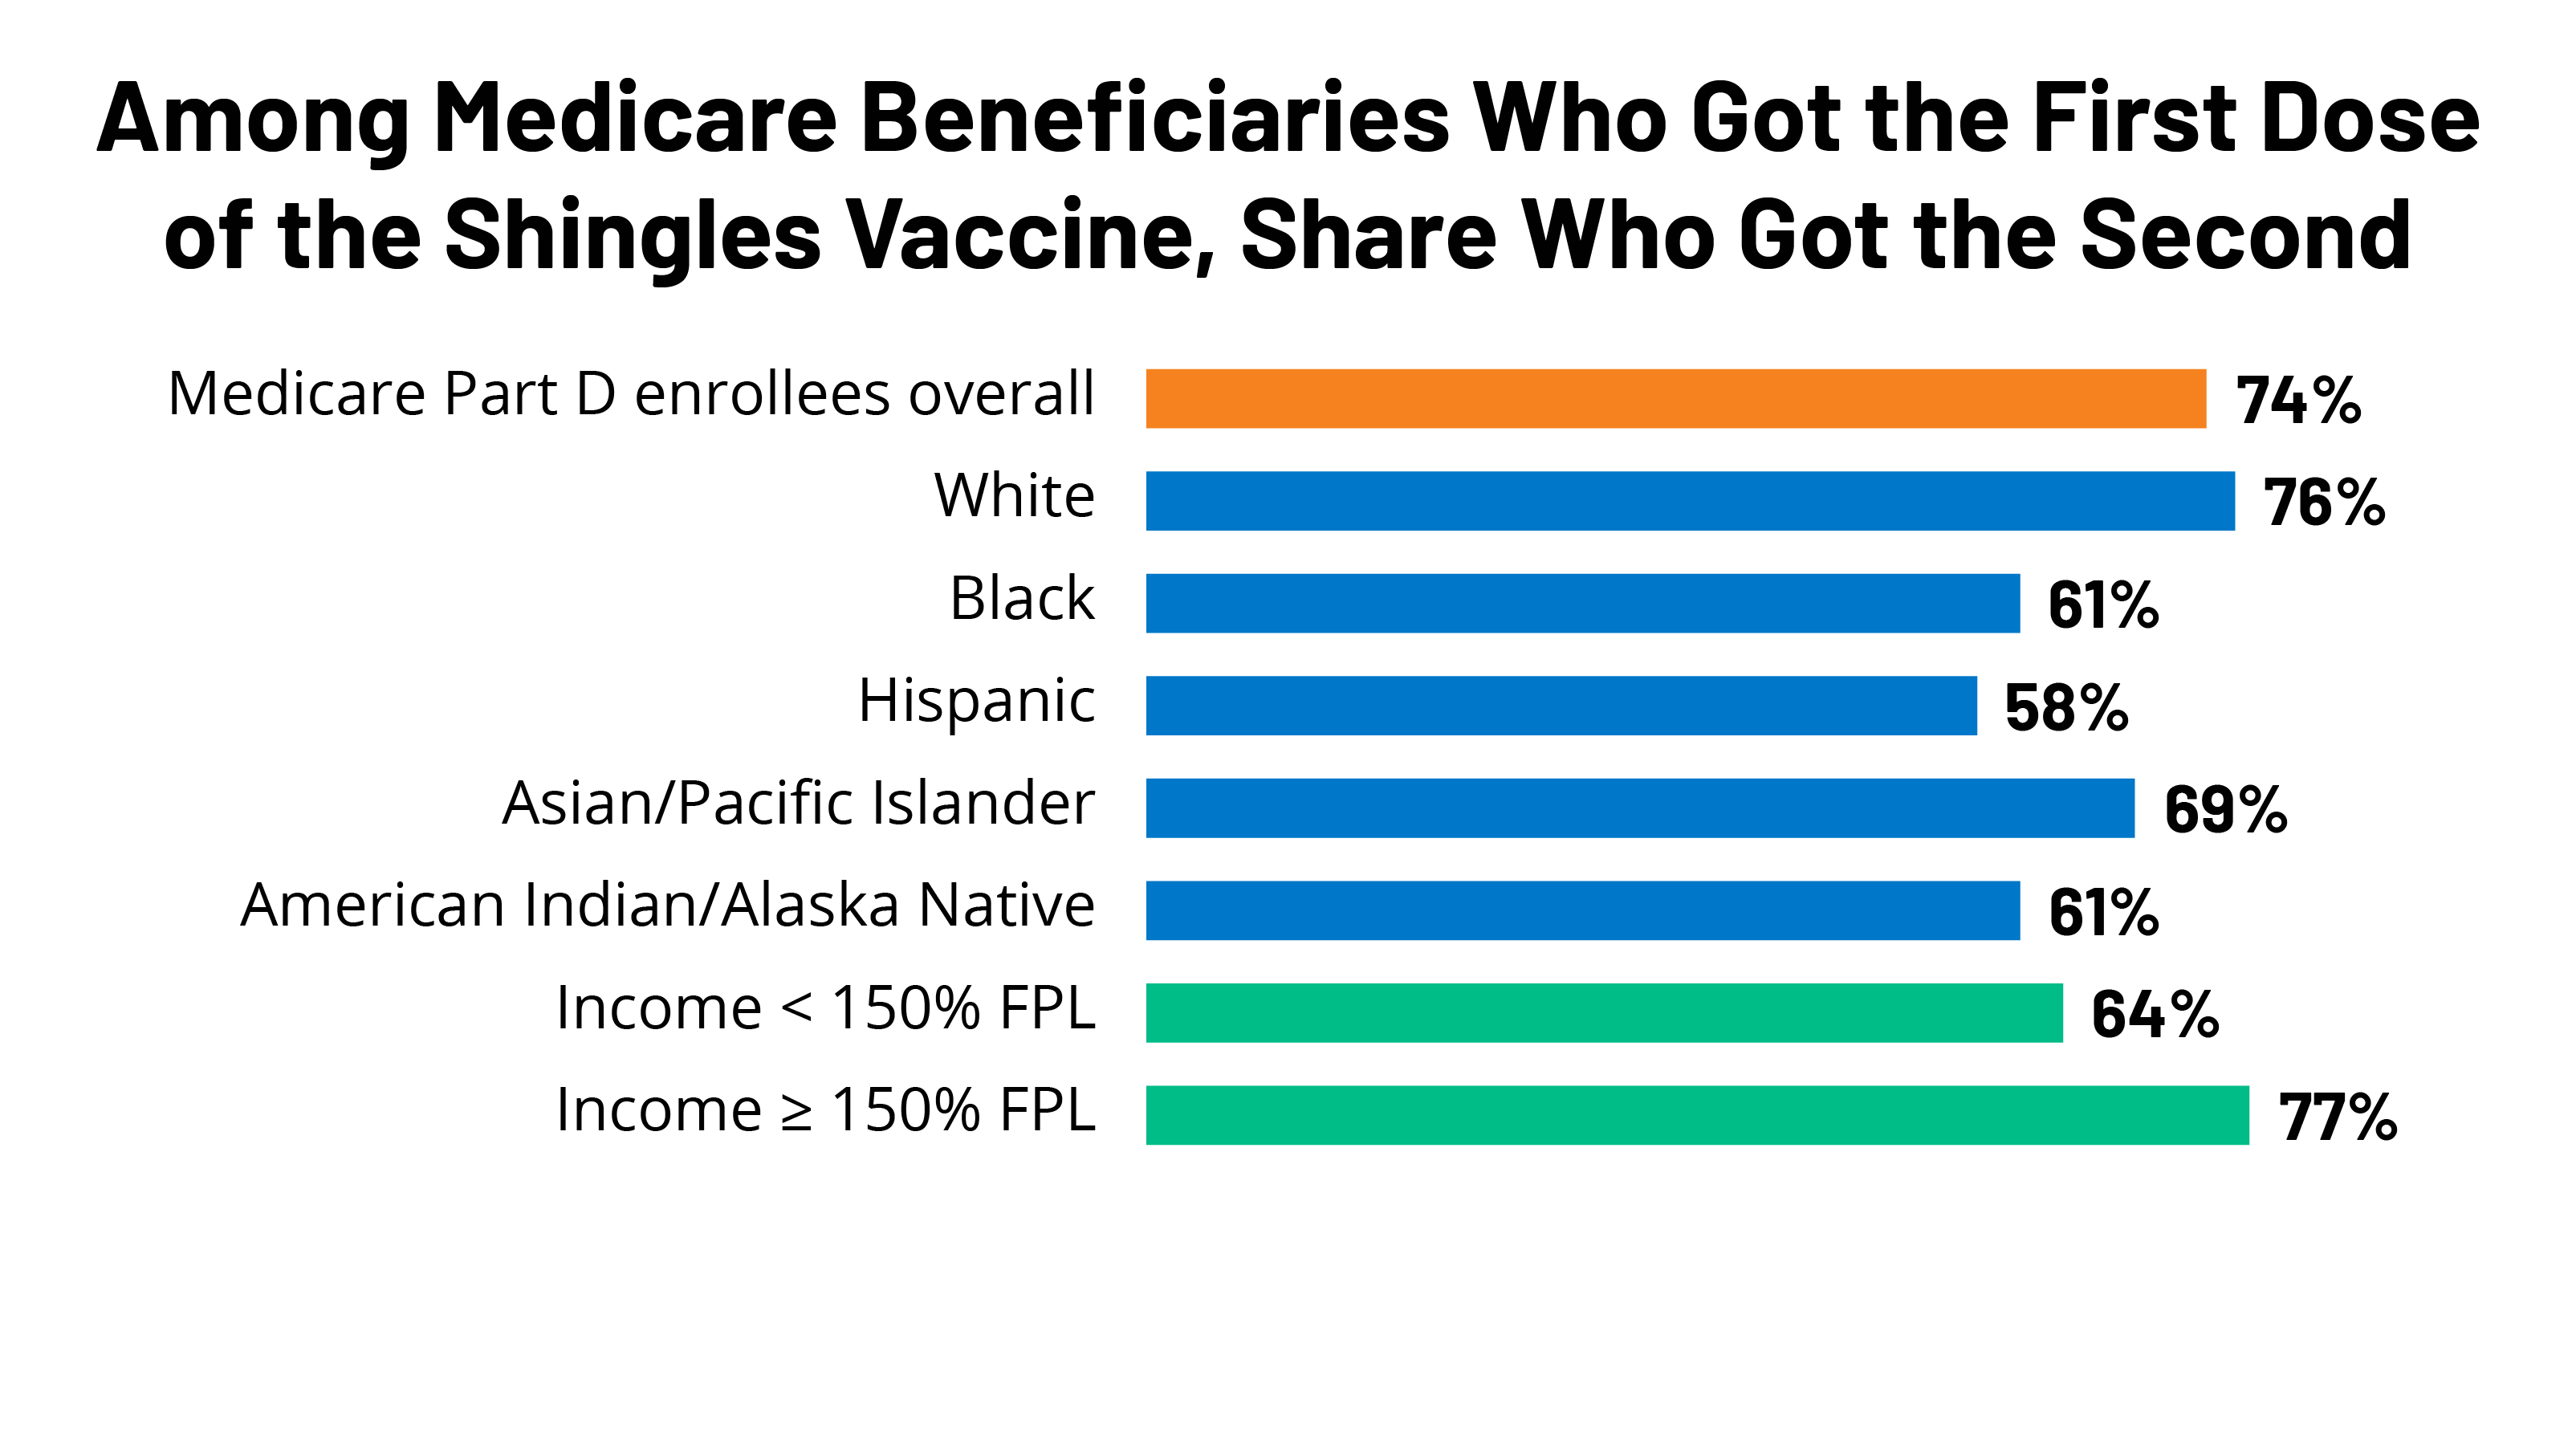 FEATURE2 Smaller Shares of Medicare Beneficiaries of Color and Low